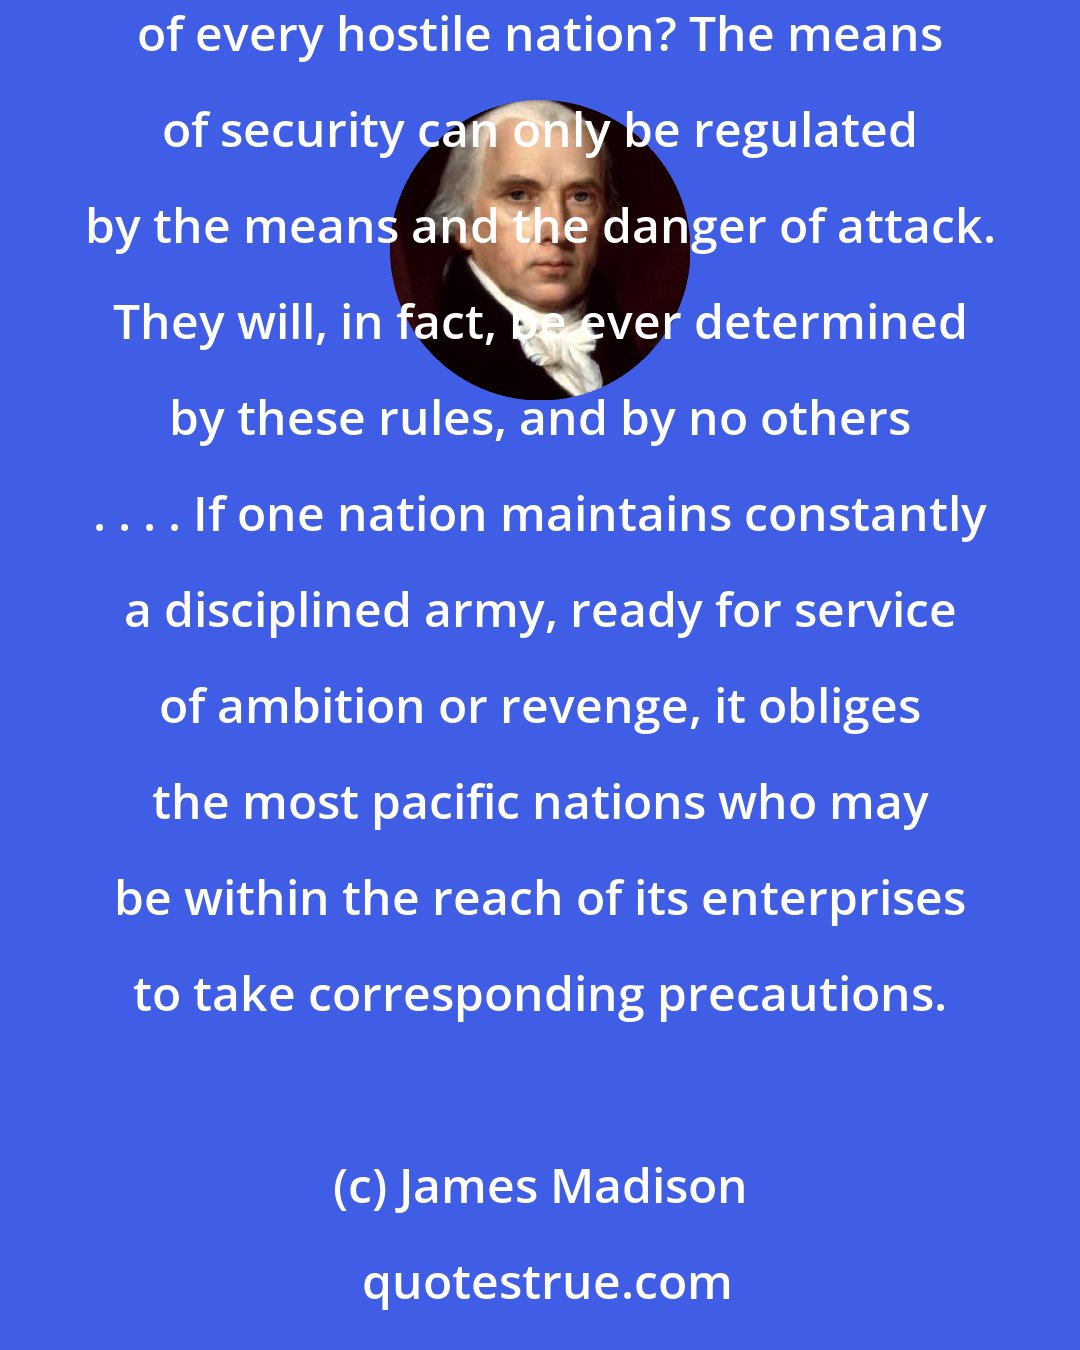 James Madison: How could a readiness for war in time of peace be safely prohibited, unless we could prohibit, in like manner, the preparations and establishments of every hostile nation? The means of security can only be regulated by the means and the danger of attack. They will, in fact, be ever determined by these rules, and by no others . . . . If one nation maintains constantly a disciplined army, ready for service of ambition or revenge, it obliges the most pacific nations who may be within the reach of its enterprises to take corresponding precautions.